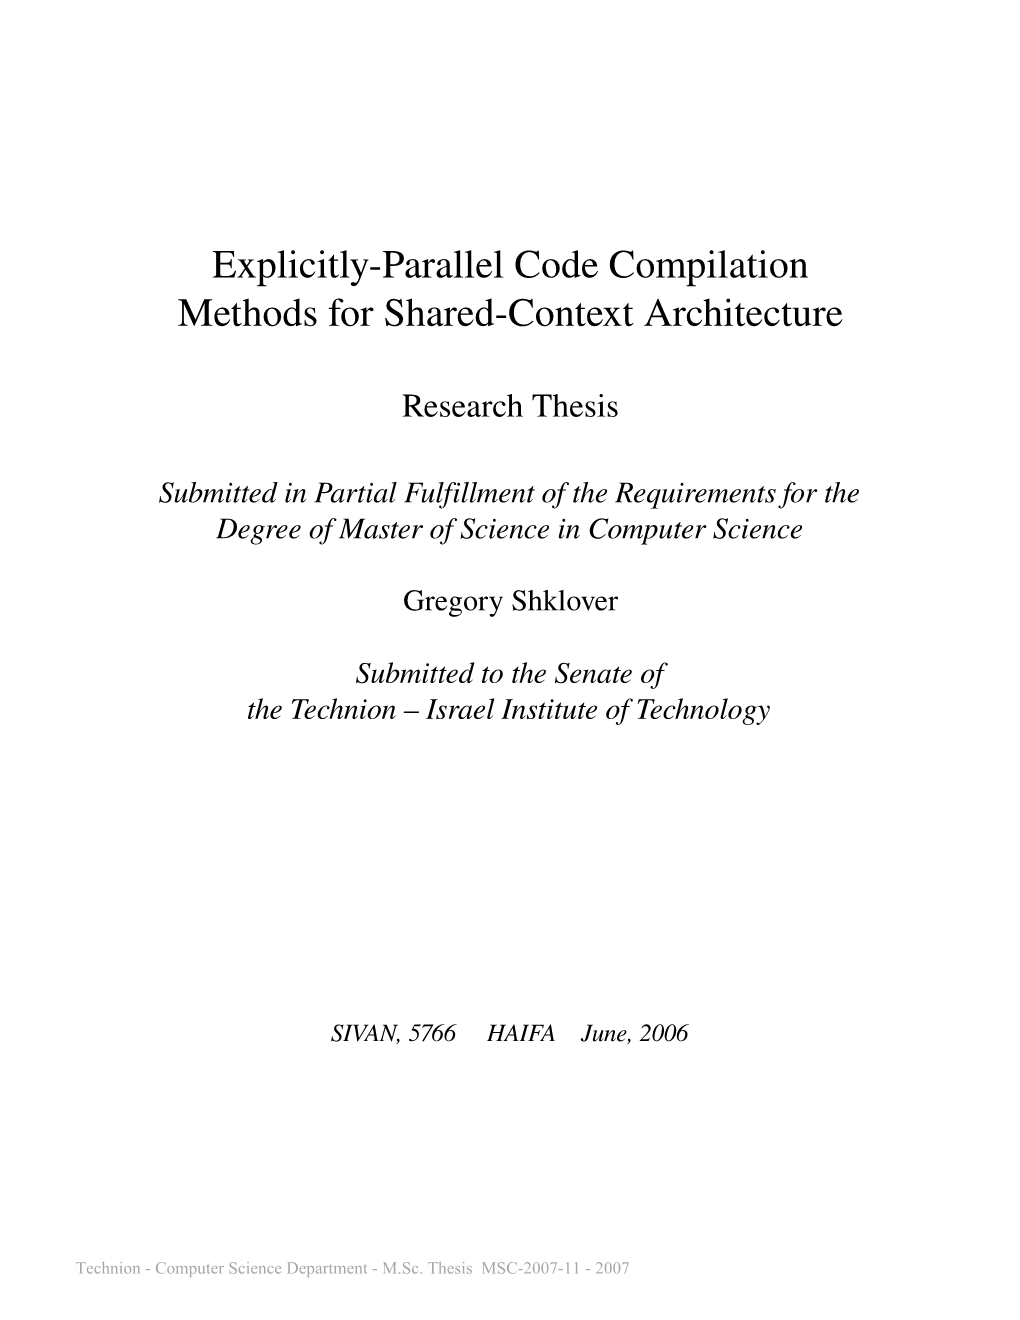 Explicitly-Parallel Code Compilation Methods for Shared-Context Architecture